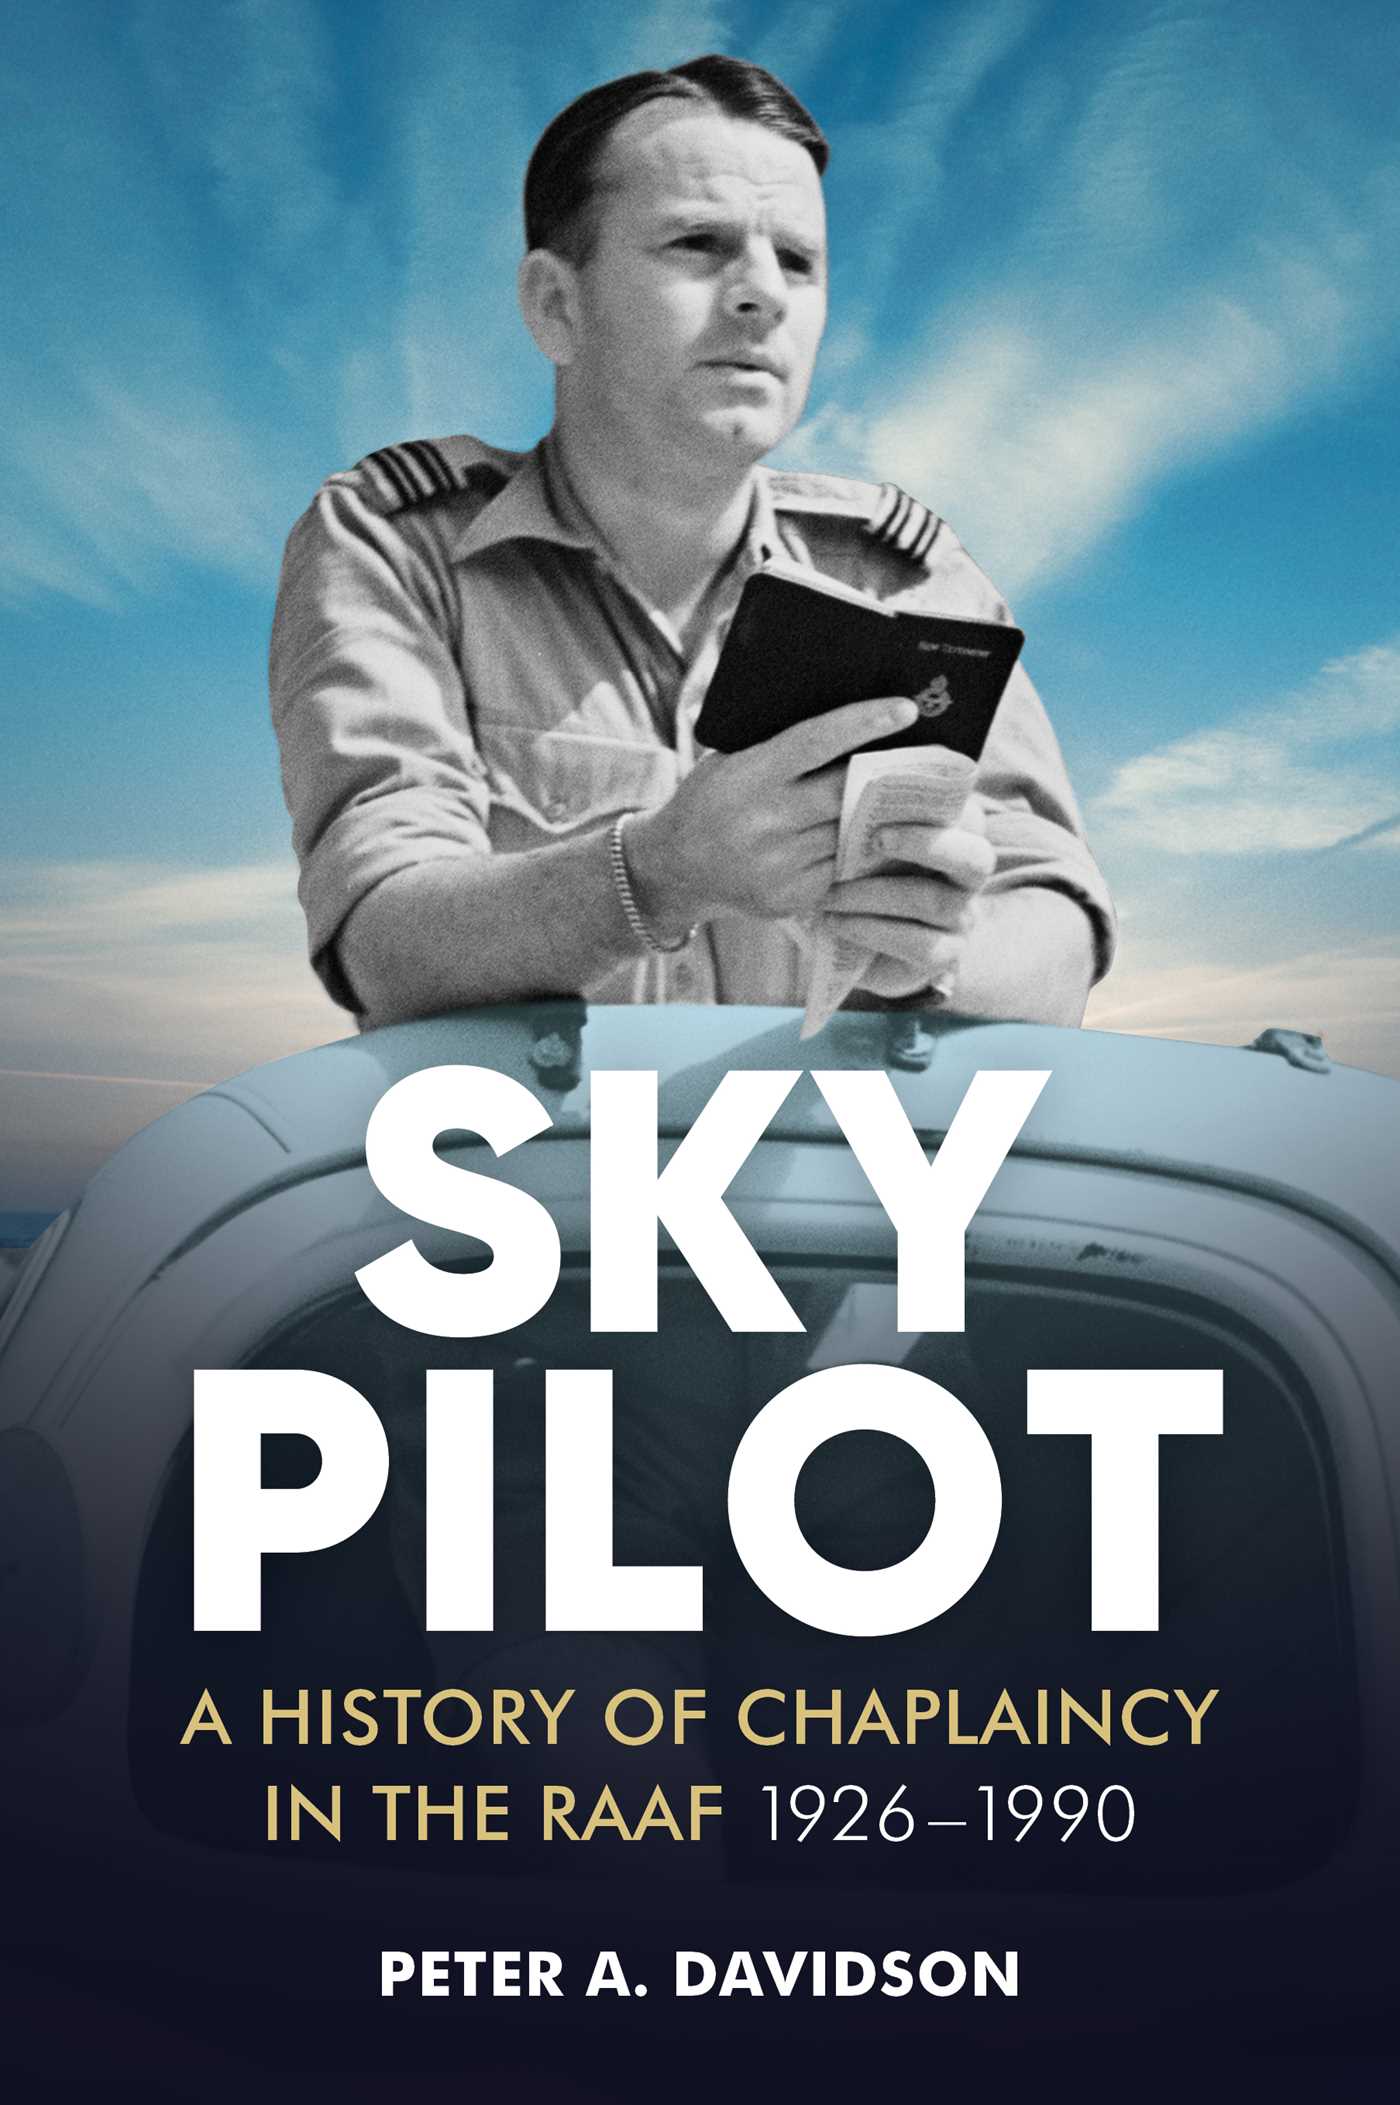 Sky pilot: a history of chaplaincy in the RAAF 1926-1990